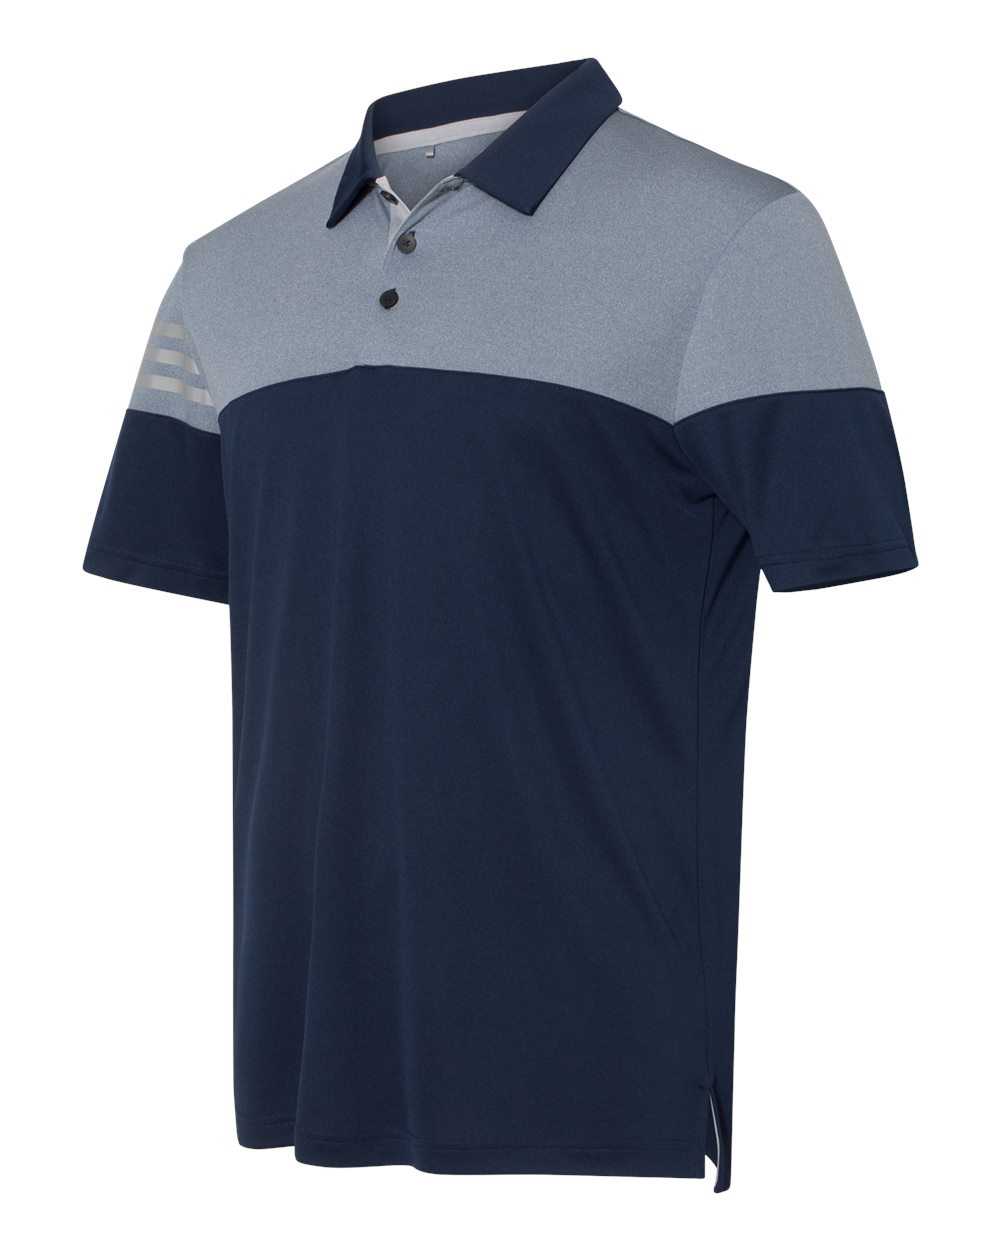 Adidas A213 Heathered 3-Stripes Block Sport Shirt - Collegiate Navy Mid Grey - HIT a Double